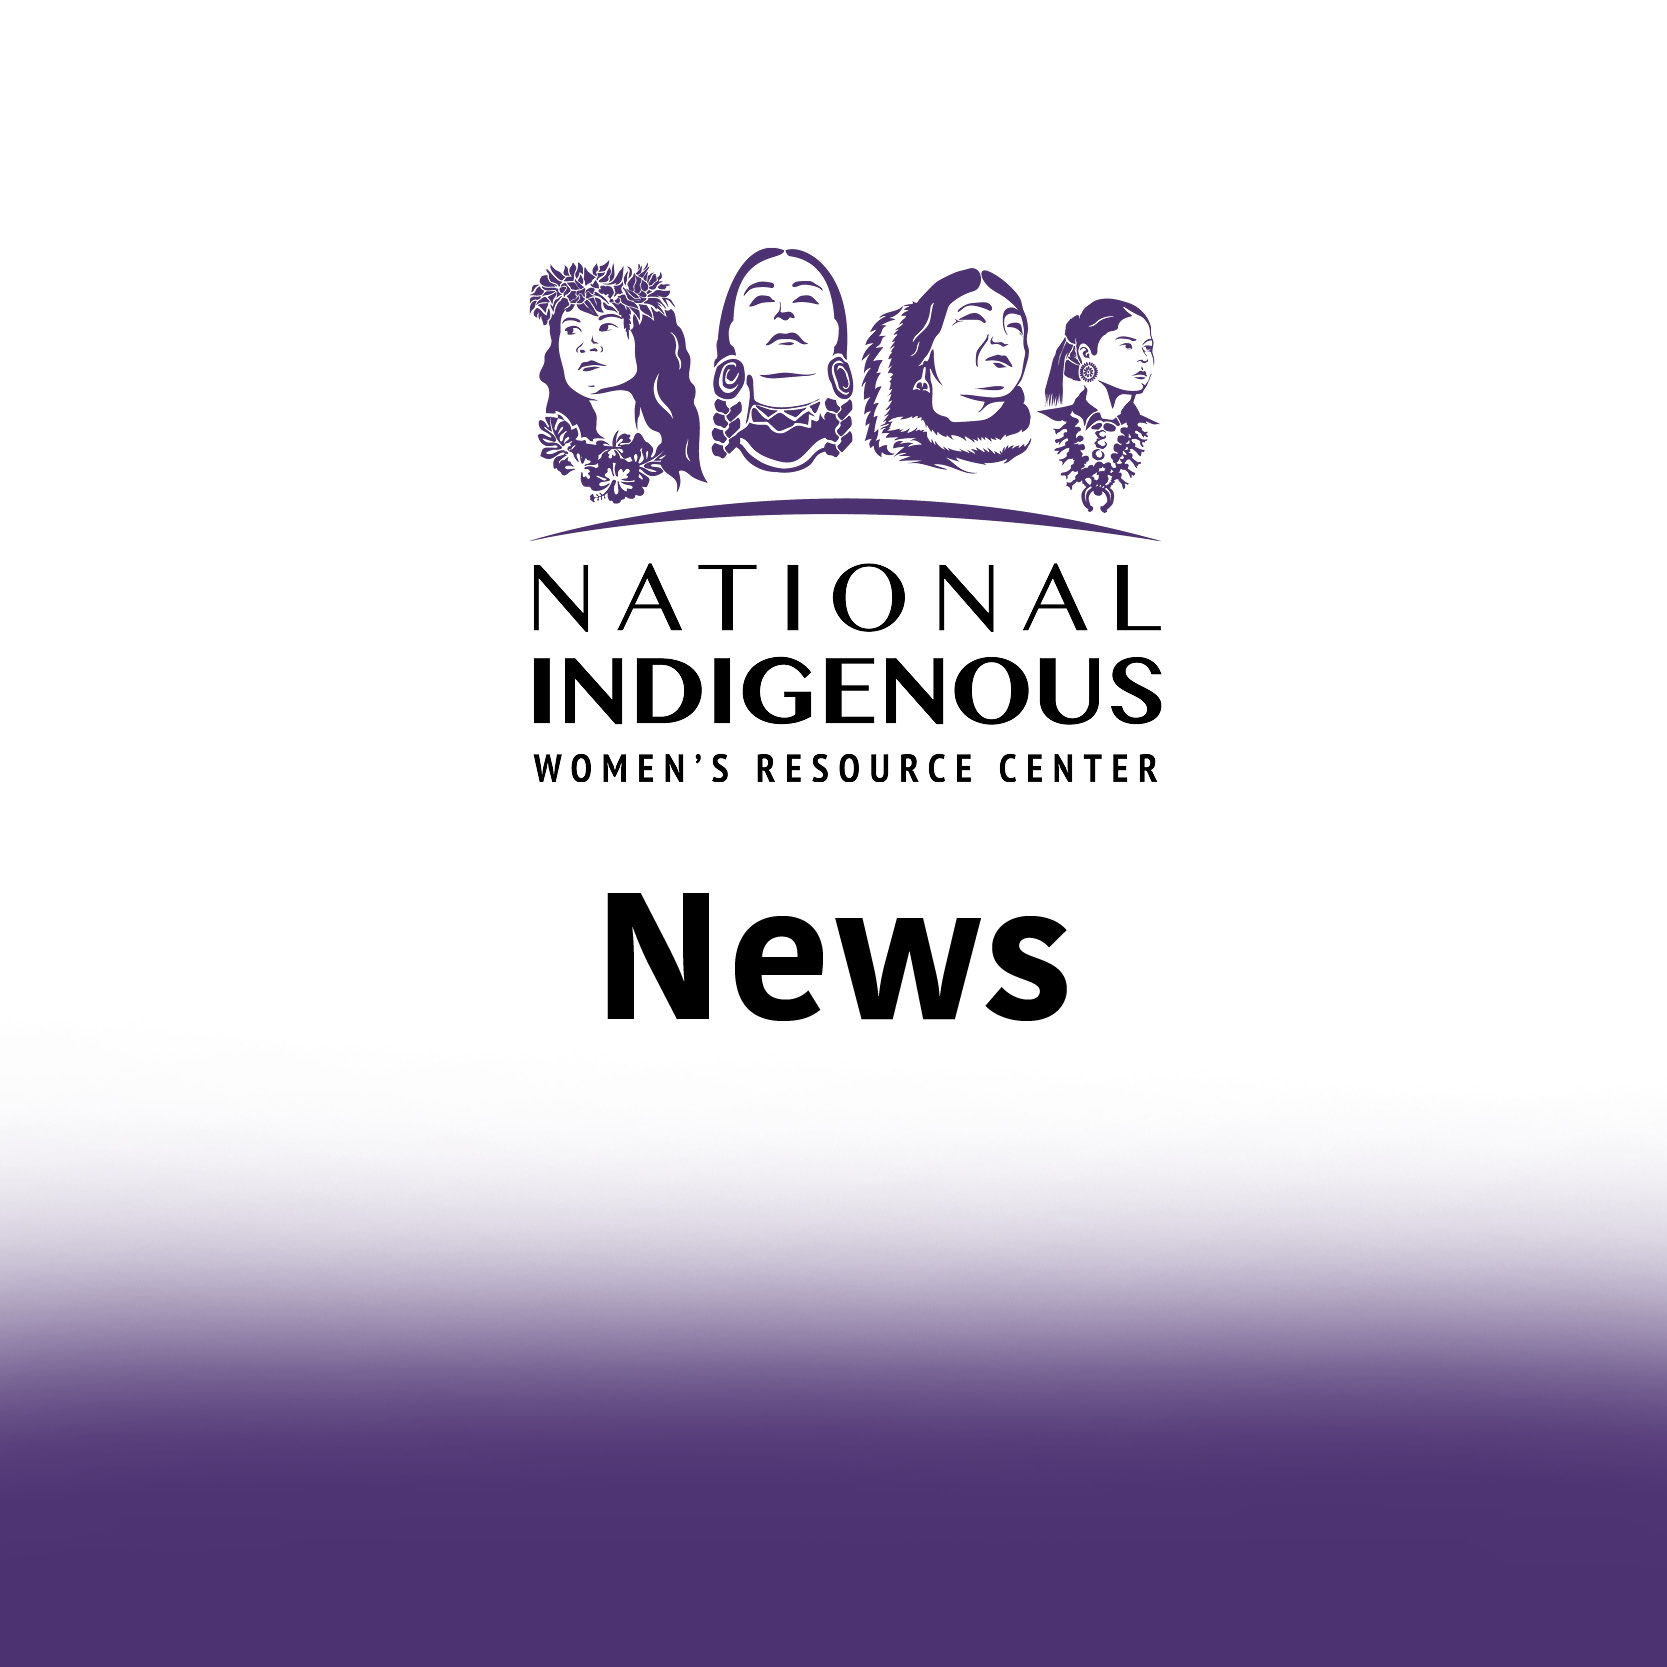 Image of NIWRC purple and black logo with text: "news".